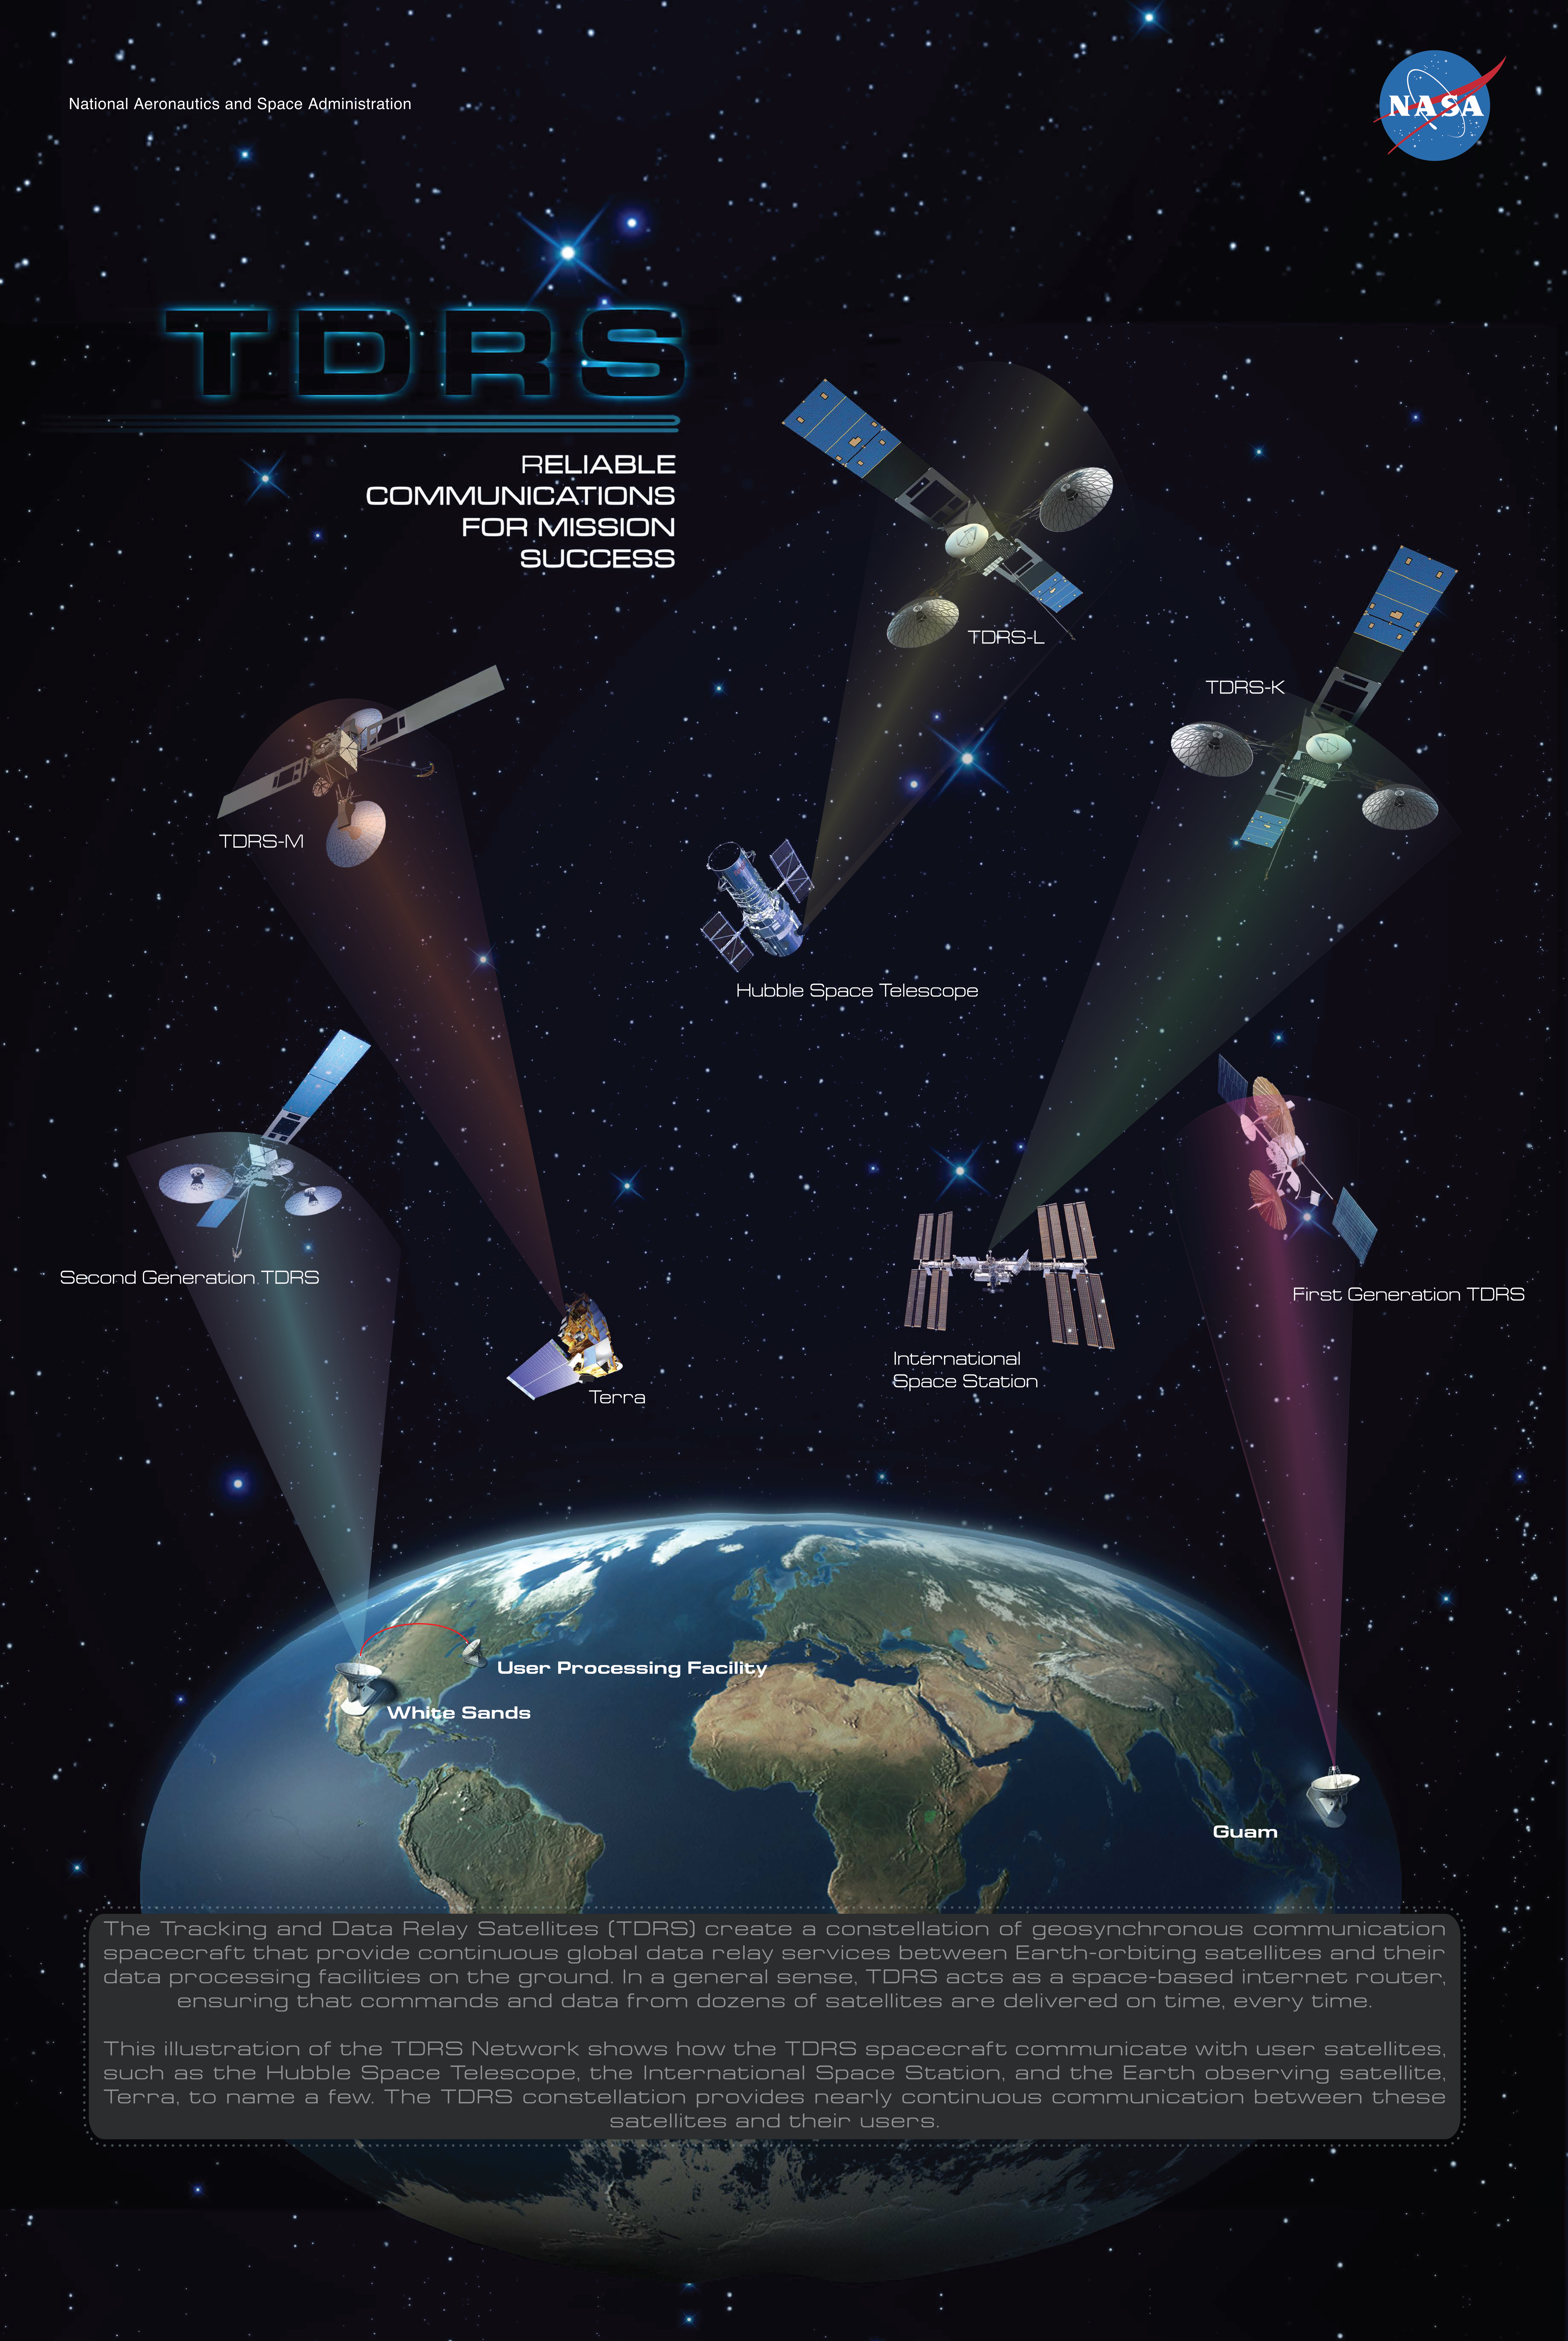 TDRS: reliable communications for mission success